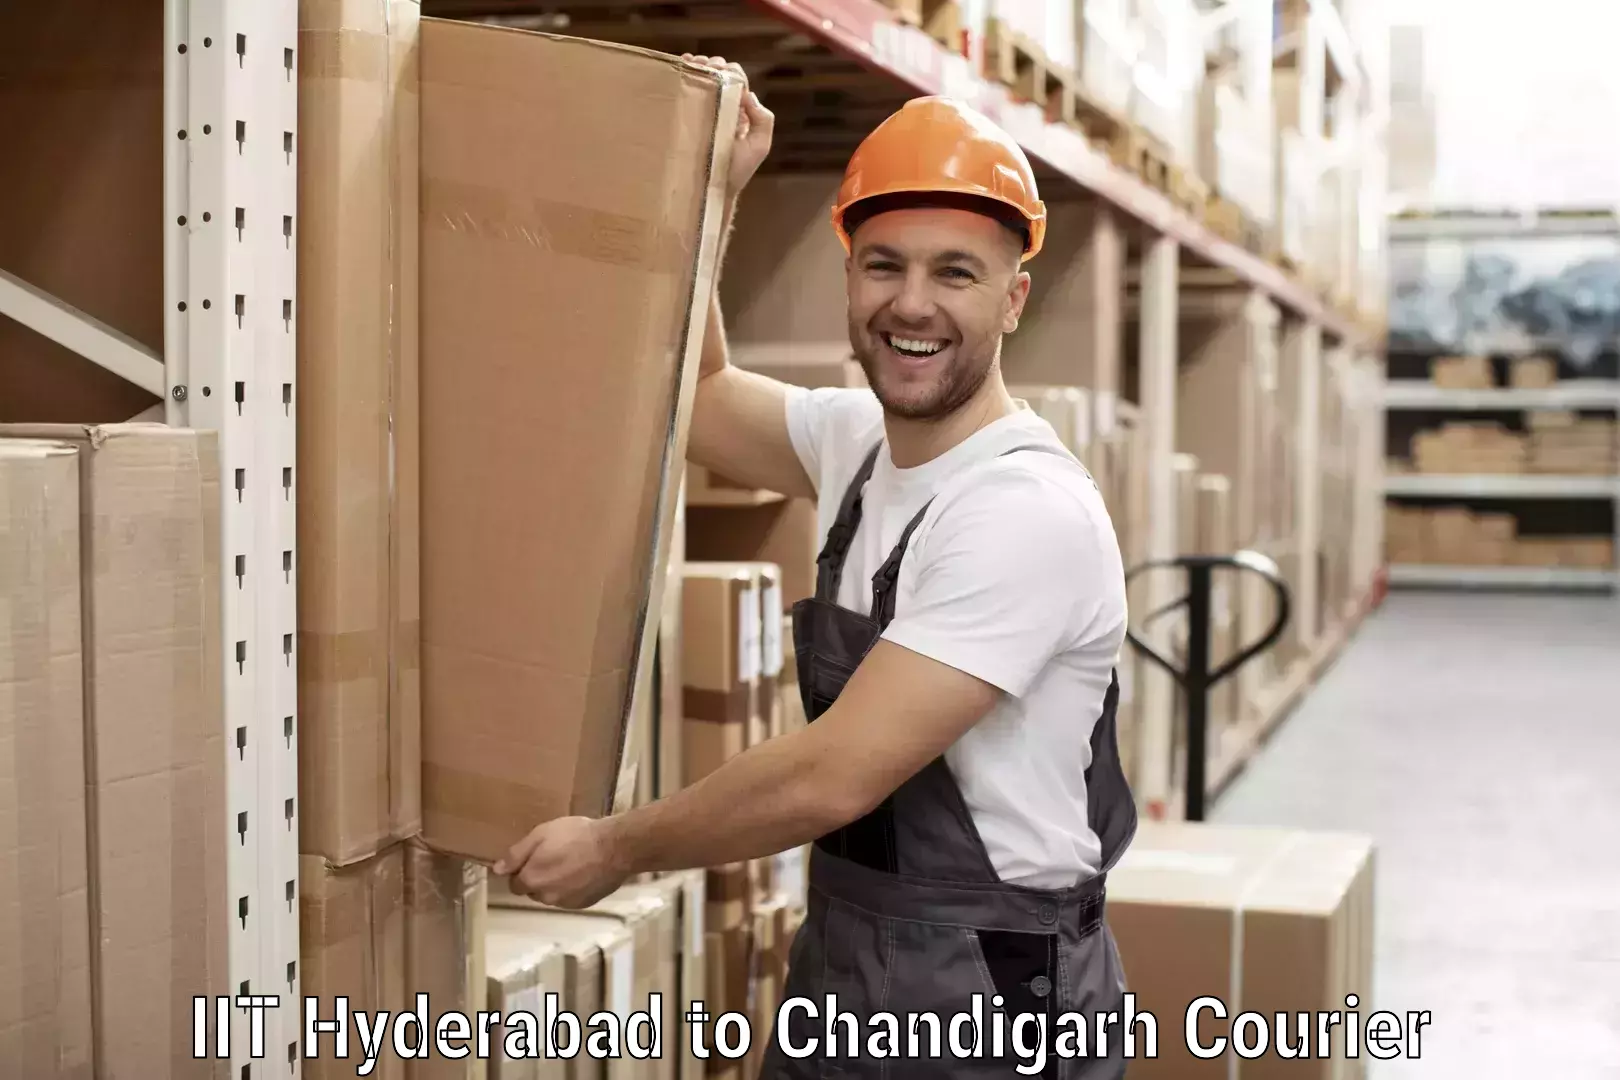 Local courier options IIT Hyderabad to Chandigarh